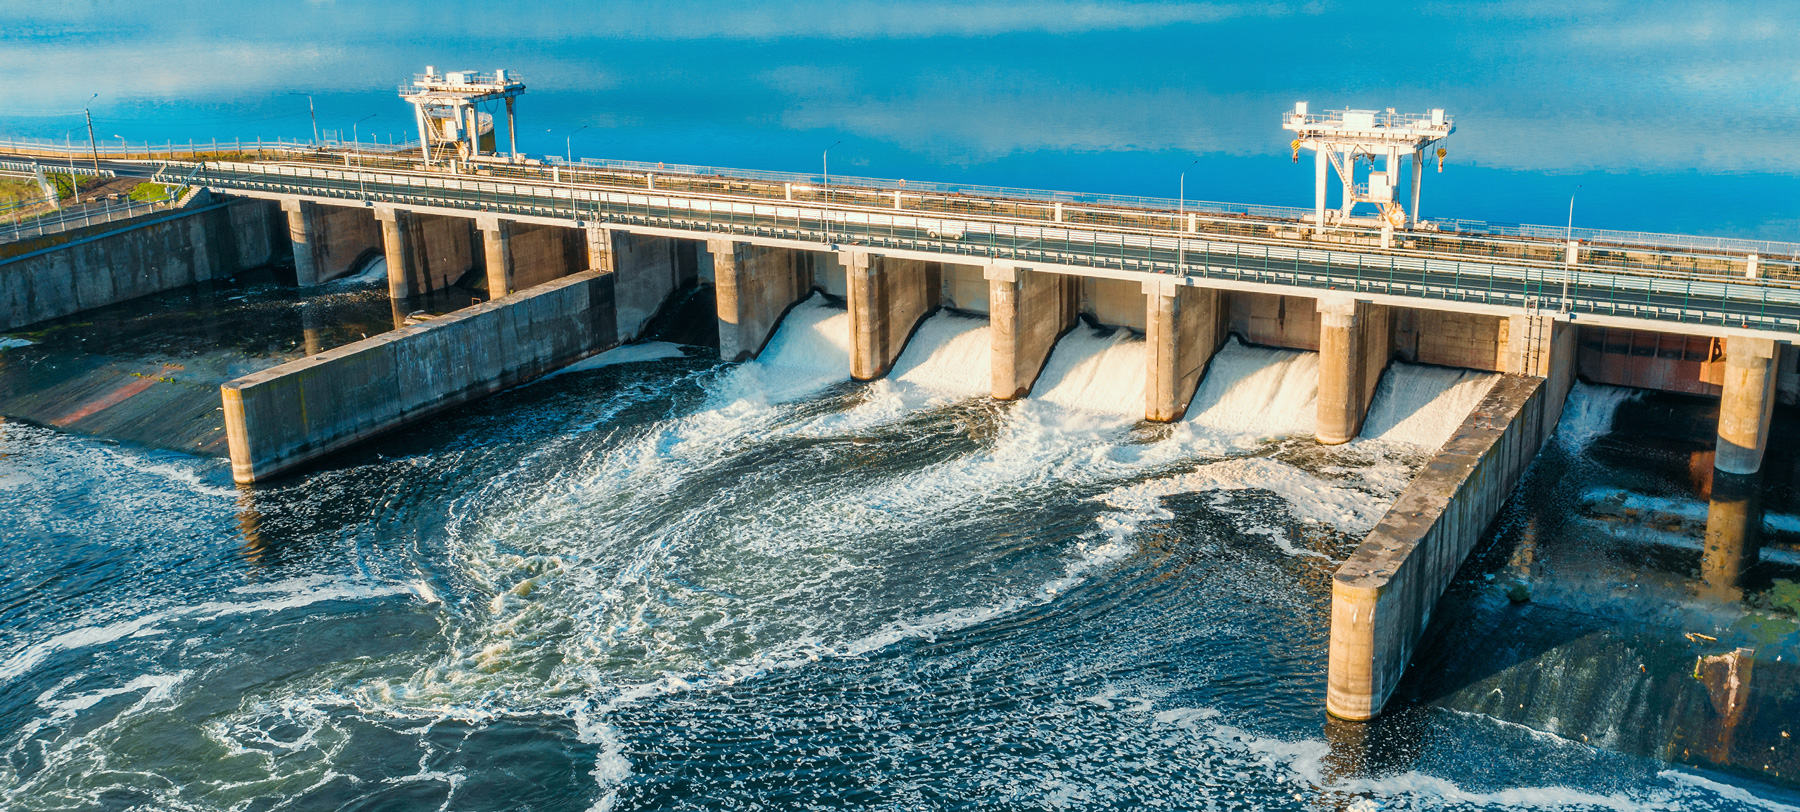 Hydropower Projects & Modeling Tools